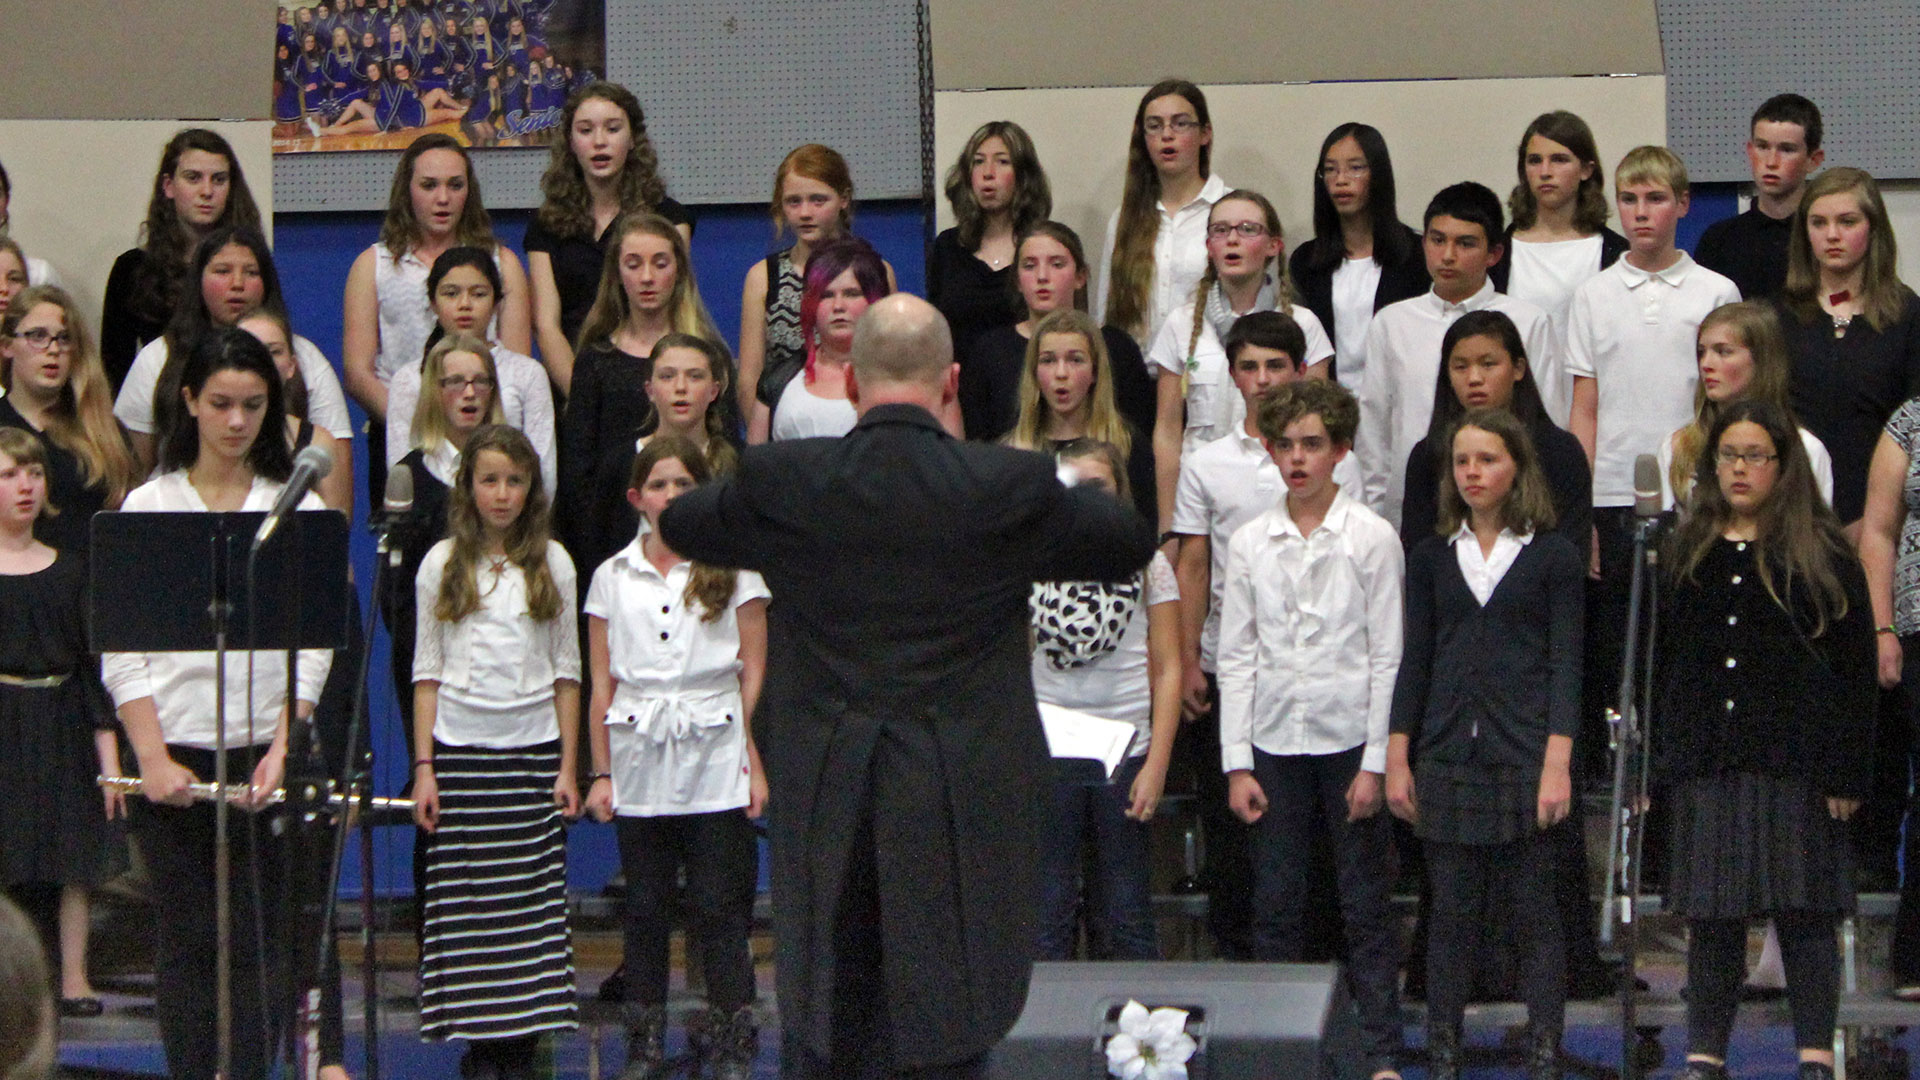 A choir group singing at the All County Music Festival.